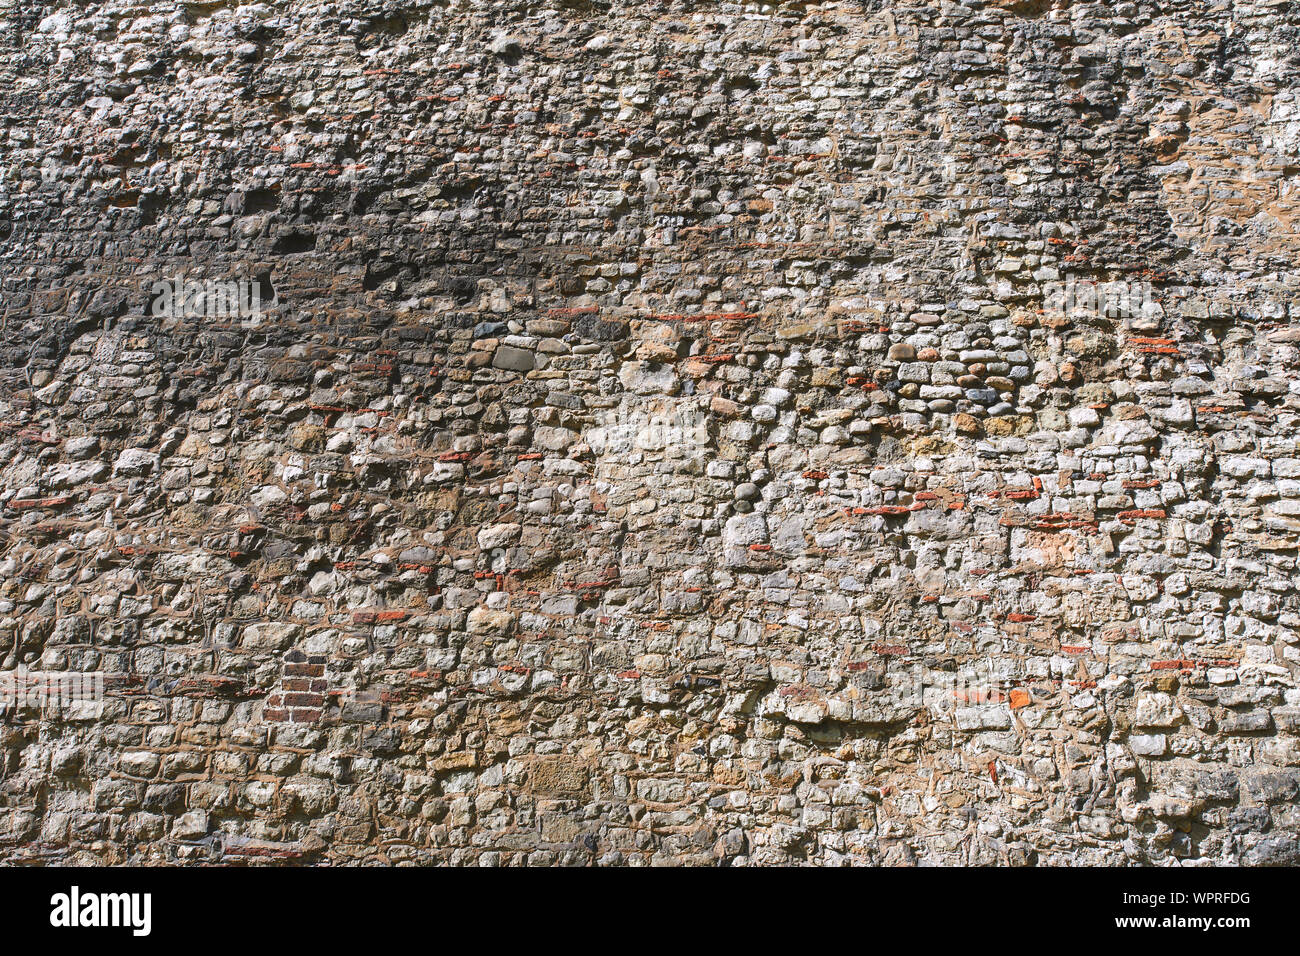 London, U.K. - Sept 1, 2019: A surviving section of the original defensive wall, first built by the Romans, around Londinium, at Tower Hill. Stock Photo